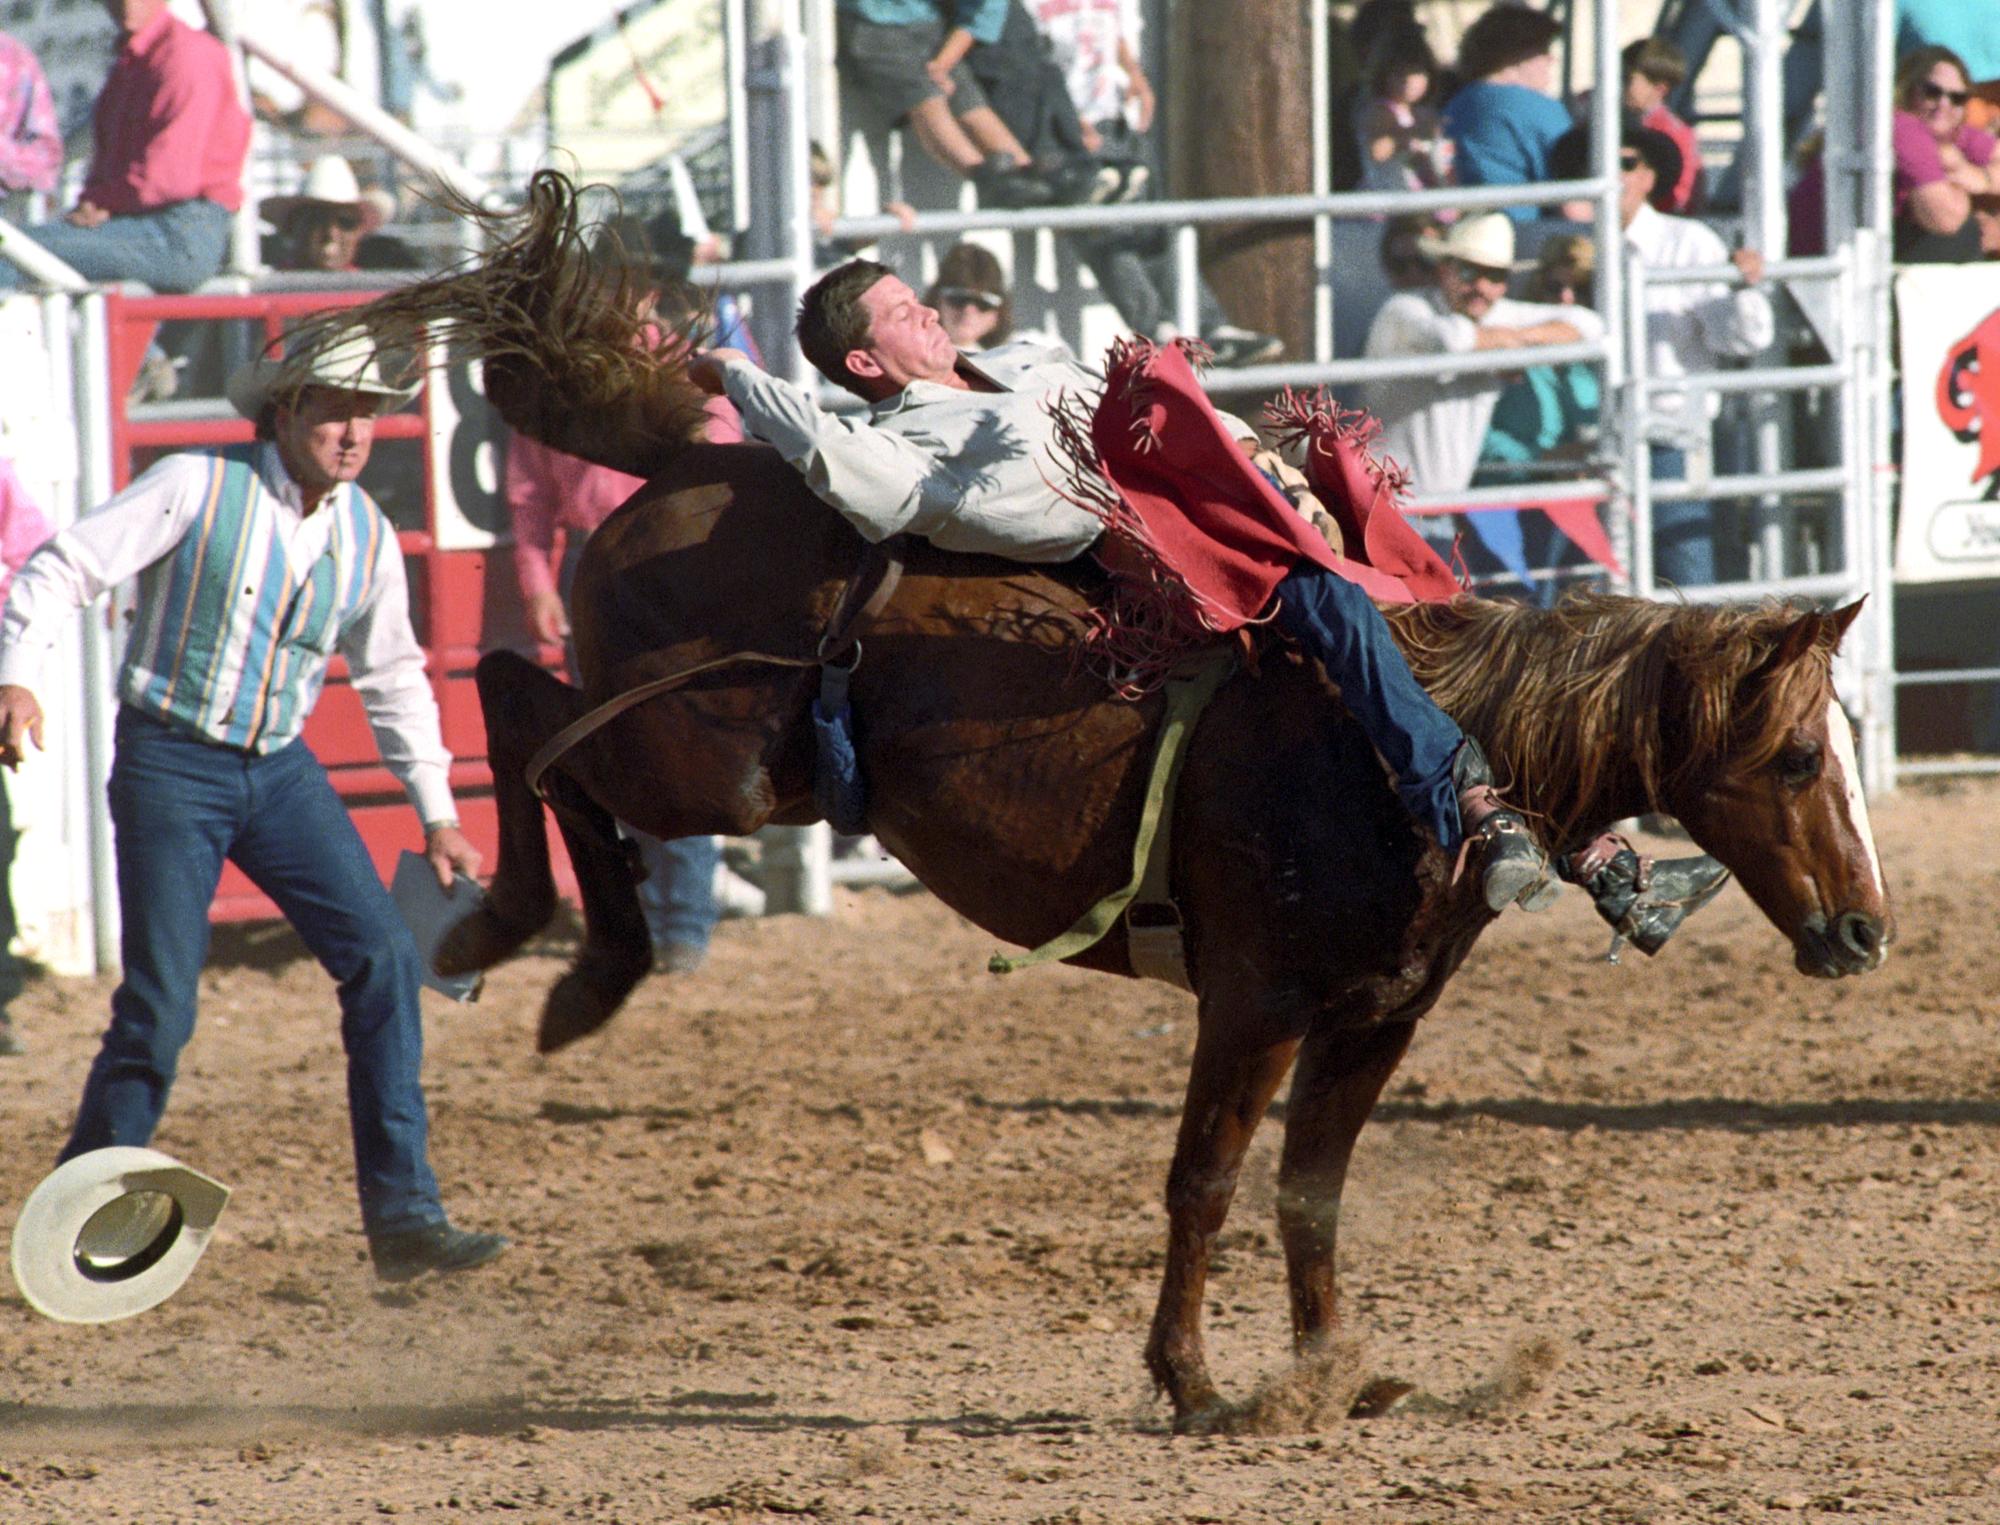 Imperial Valley Rodeo (1992) - Saddle Bronc #06